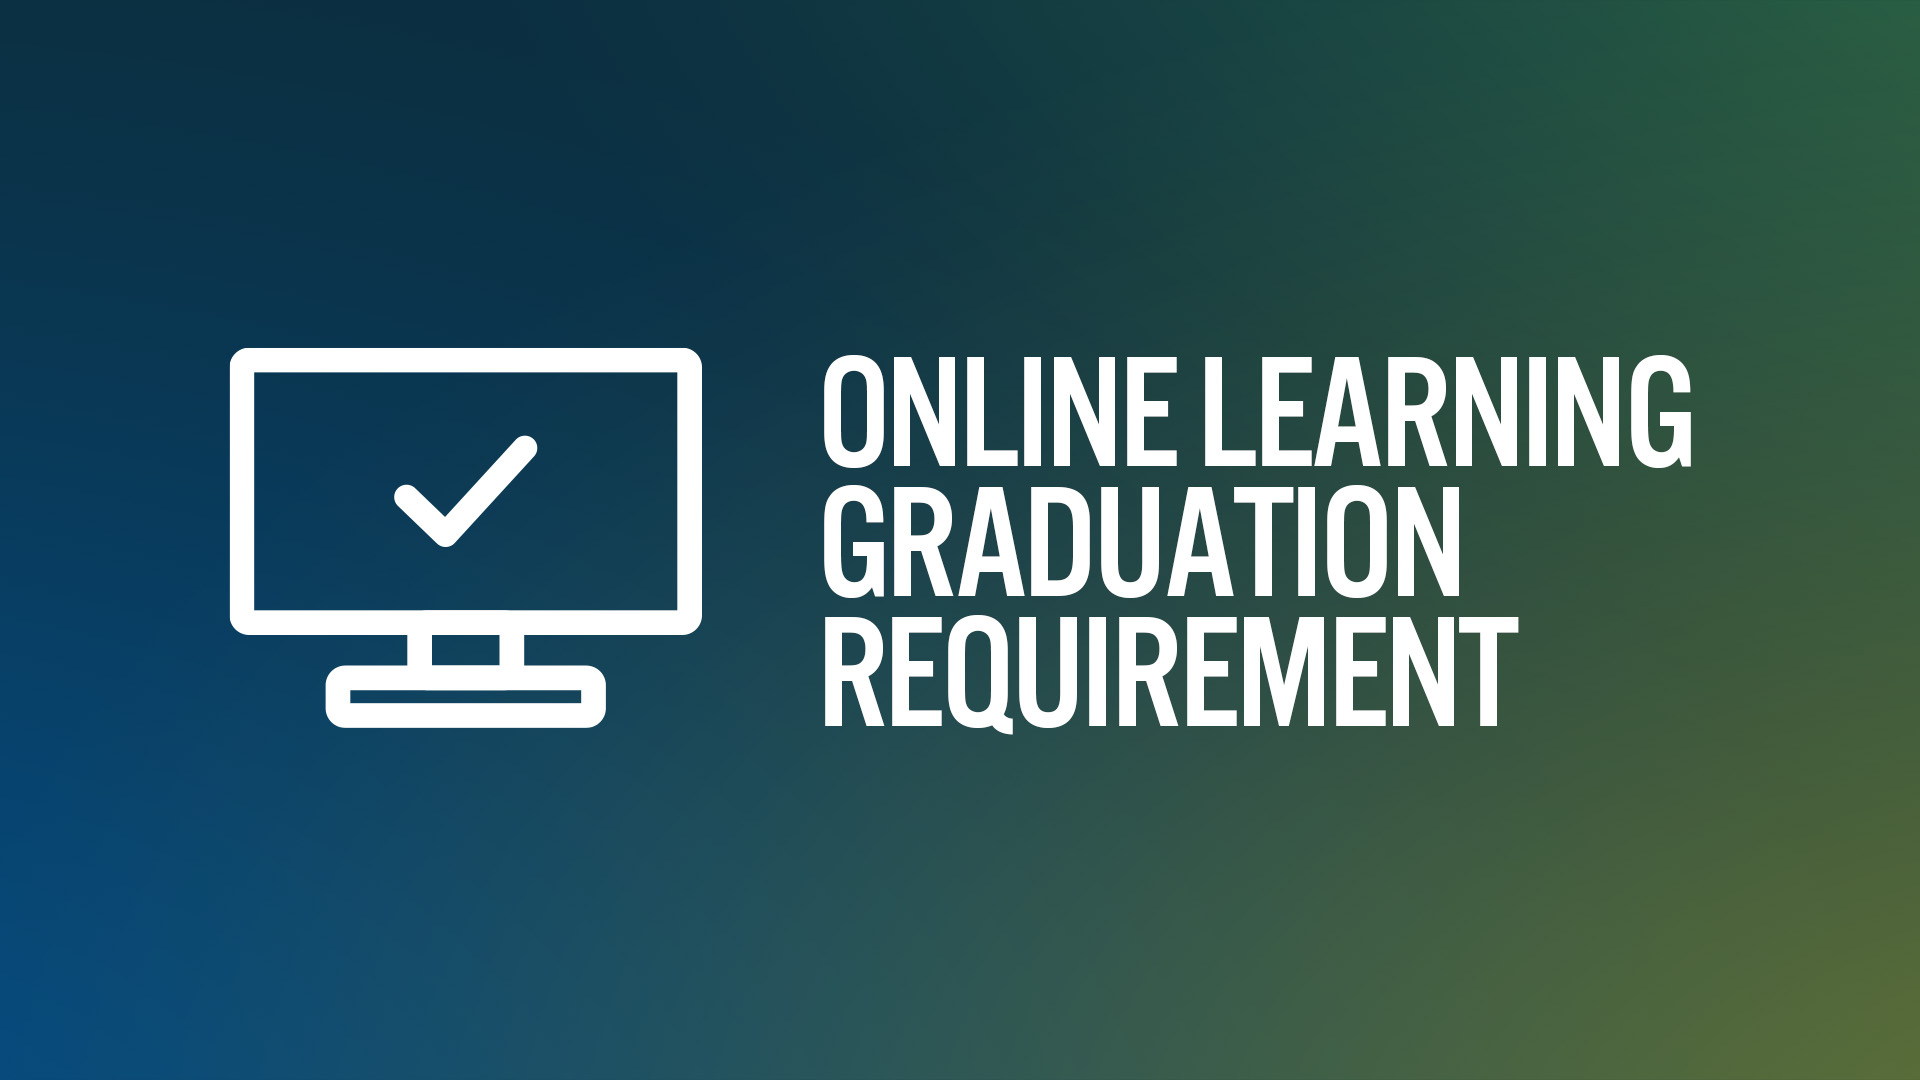 Online Learning Graduation Requirement